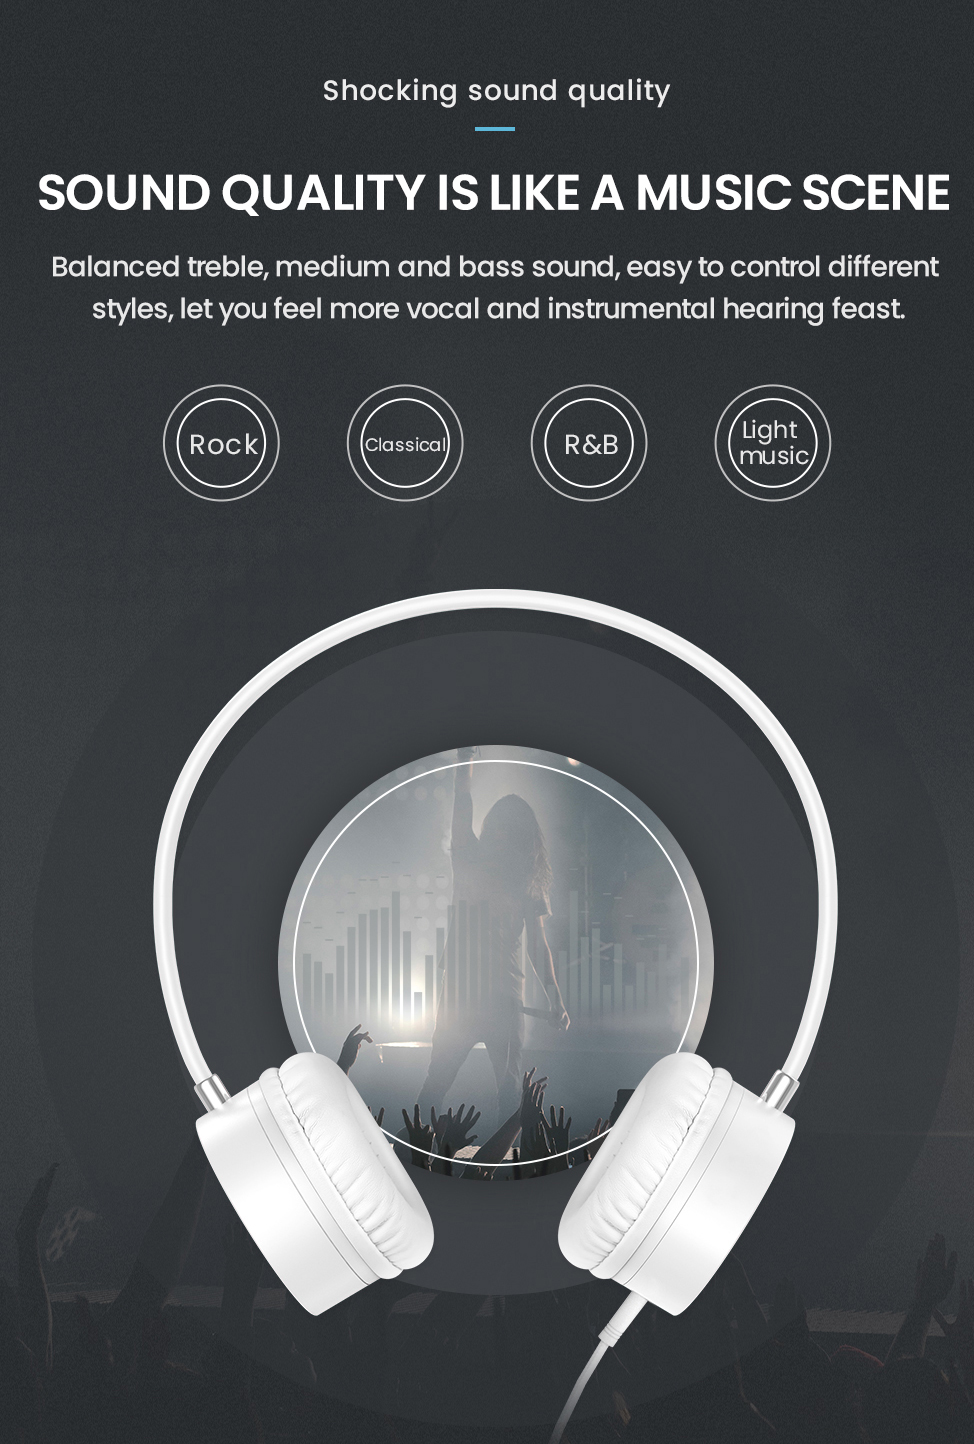 Picun-C20-Wired-Headphones-Over-Ear-Headset-Stereo-Bass-Earphones-HiFi-Sound-Music-with-Mic-for-phon-1784186-2